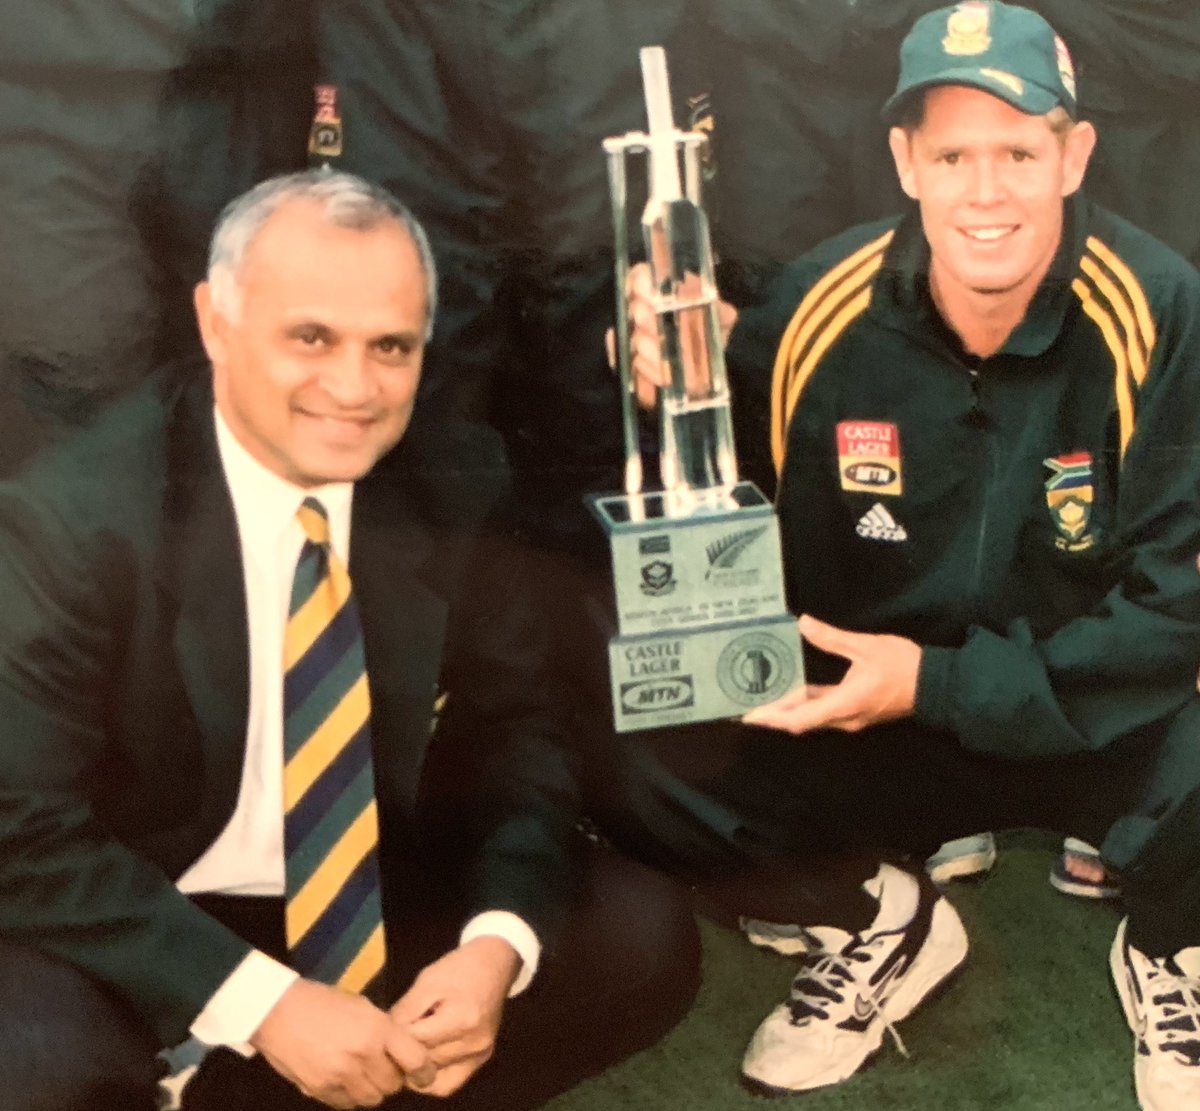 Truly sad to hear of the passing of Goolam Rajah- a friend and legendary team manager of the Proteas. He was an integral part of my cricketing journey, always professional and treated us as family. Thoughts are with Poppy and family.